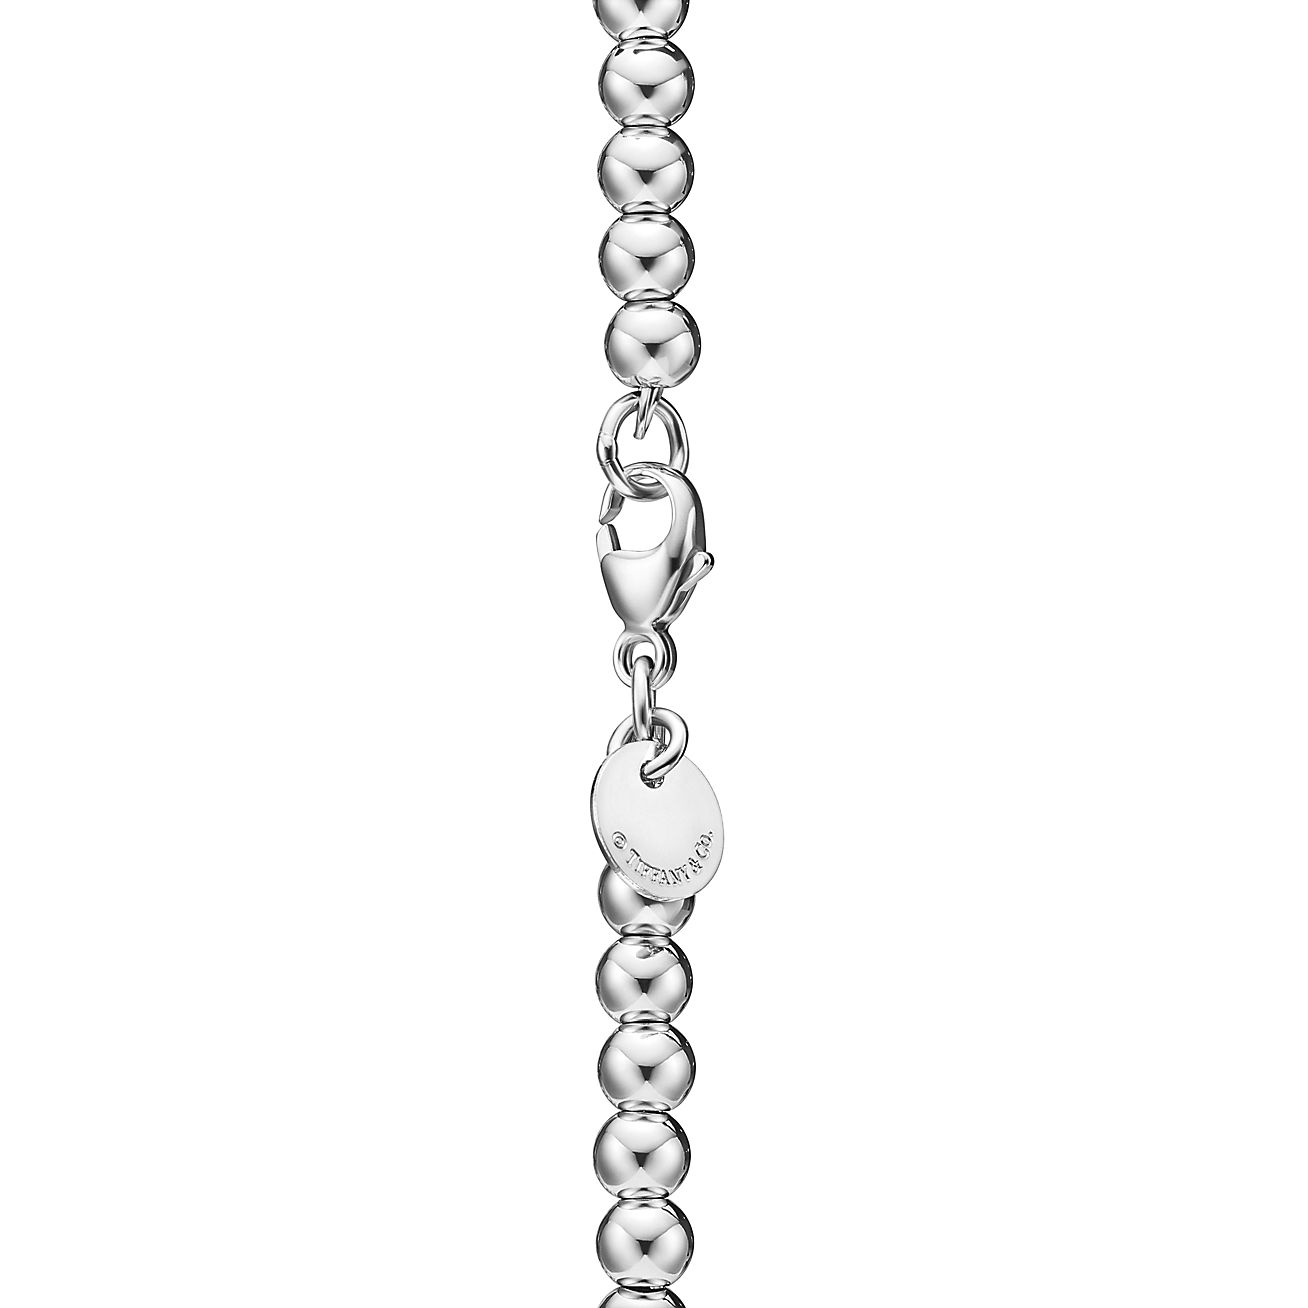 Return to Tiffany Heart Tag Bead Bracelet in Yellow Gold, Size: 6.5 in.